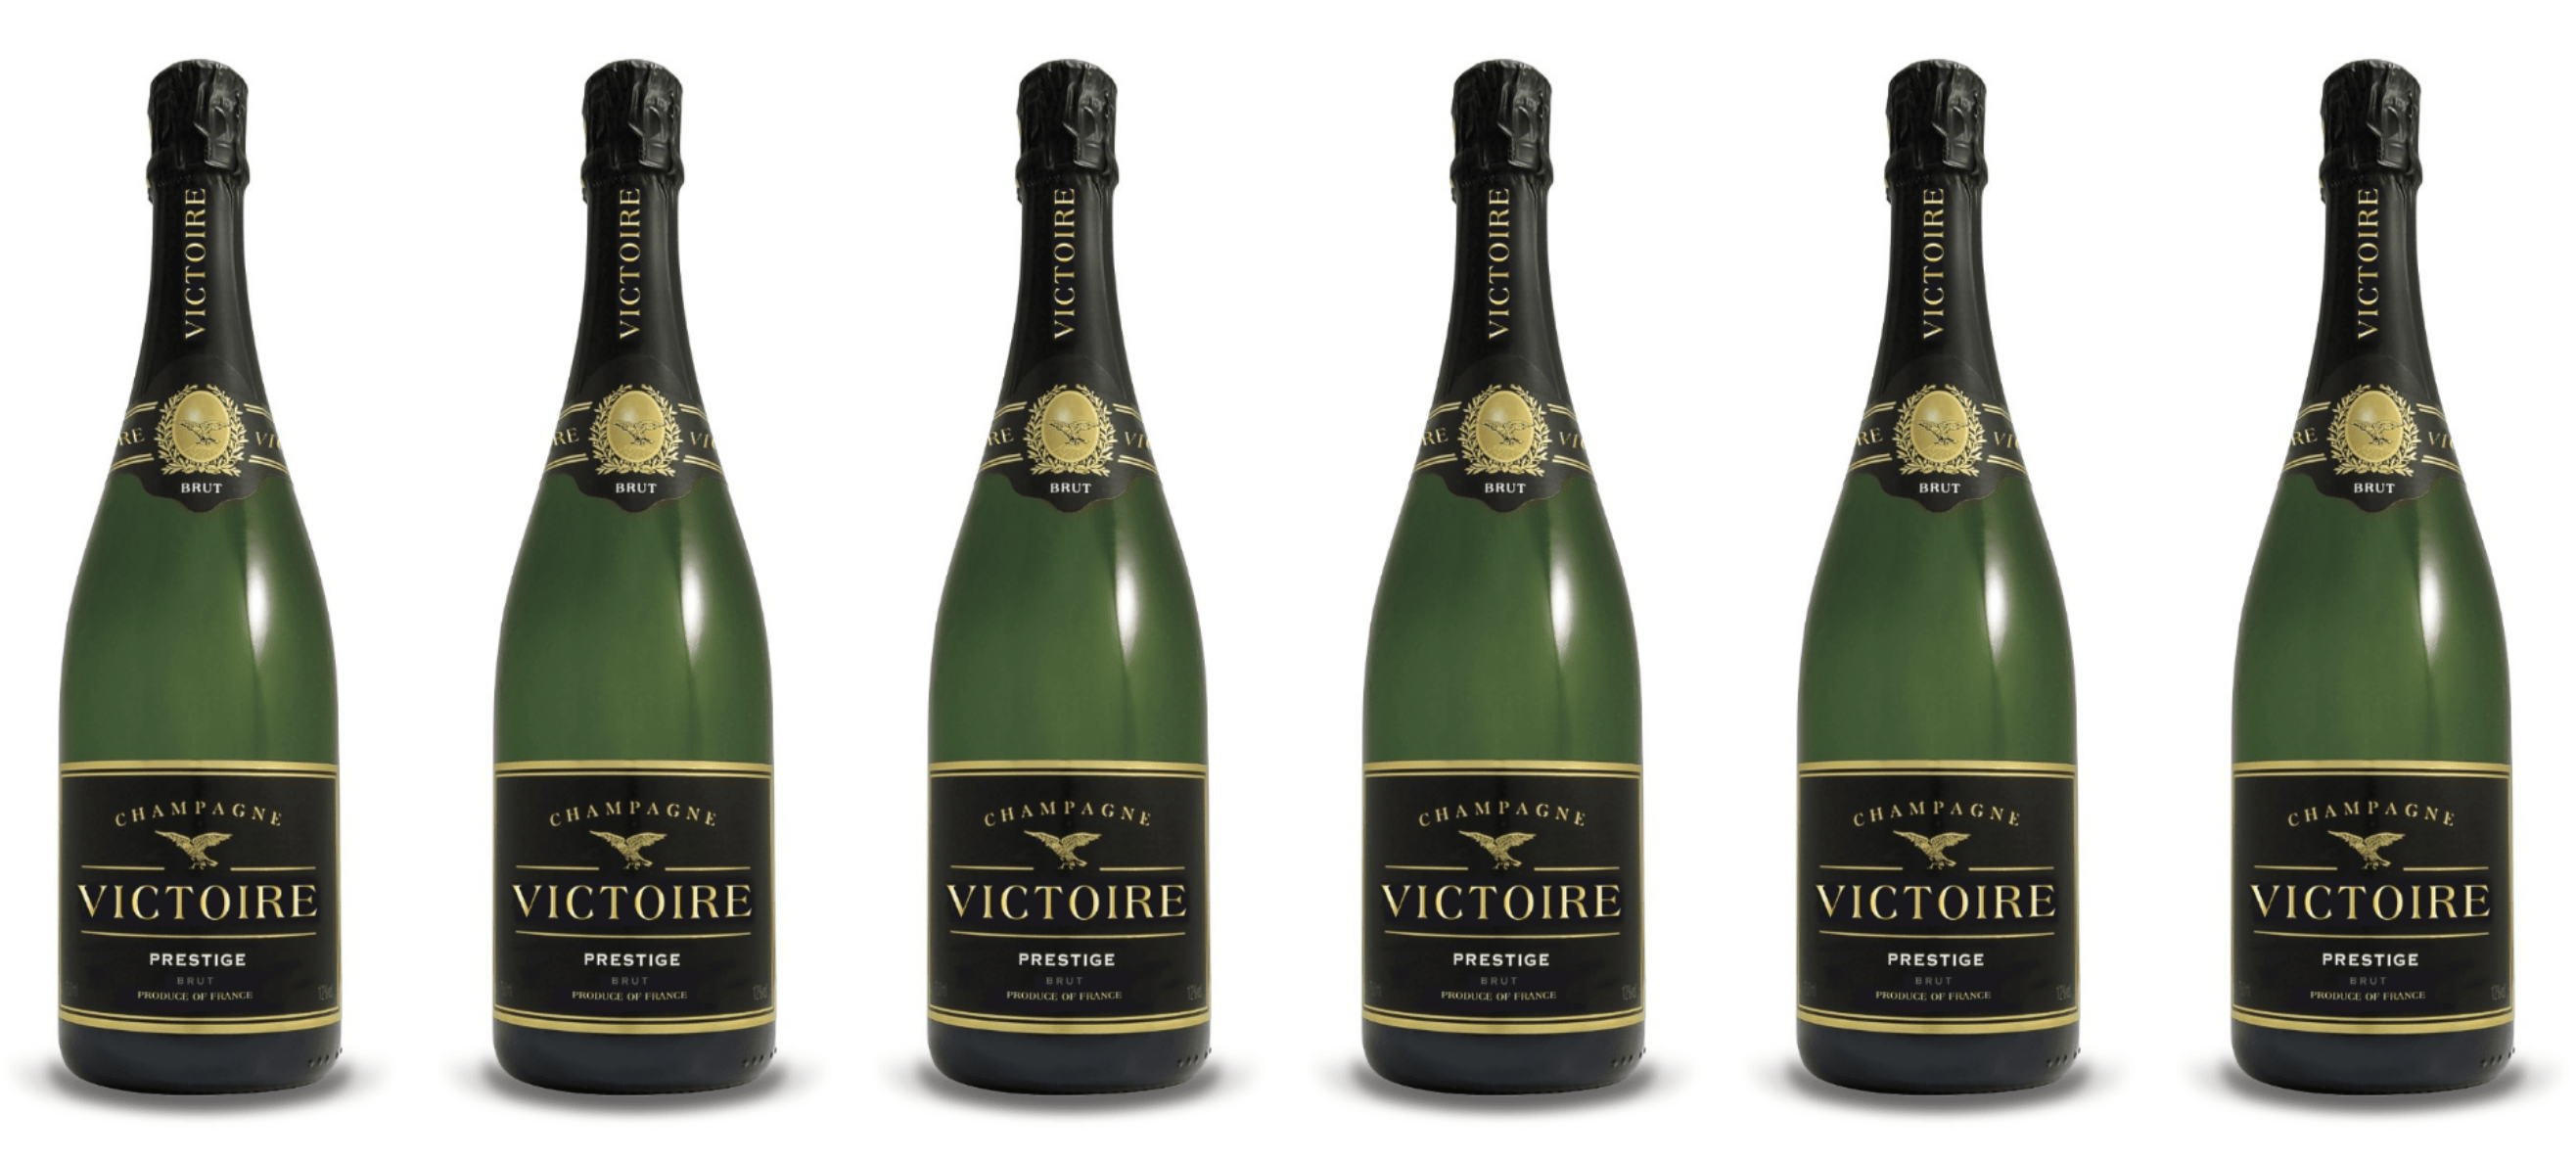 Try This : A Solid Champagne At Half The Price Of Veuve?